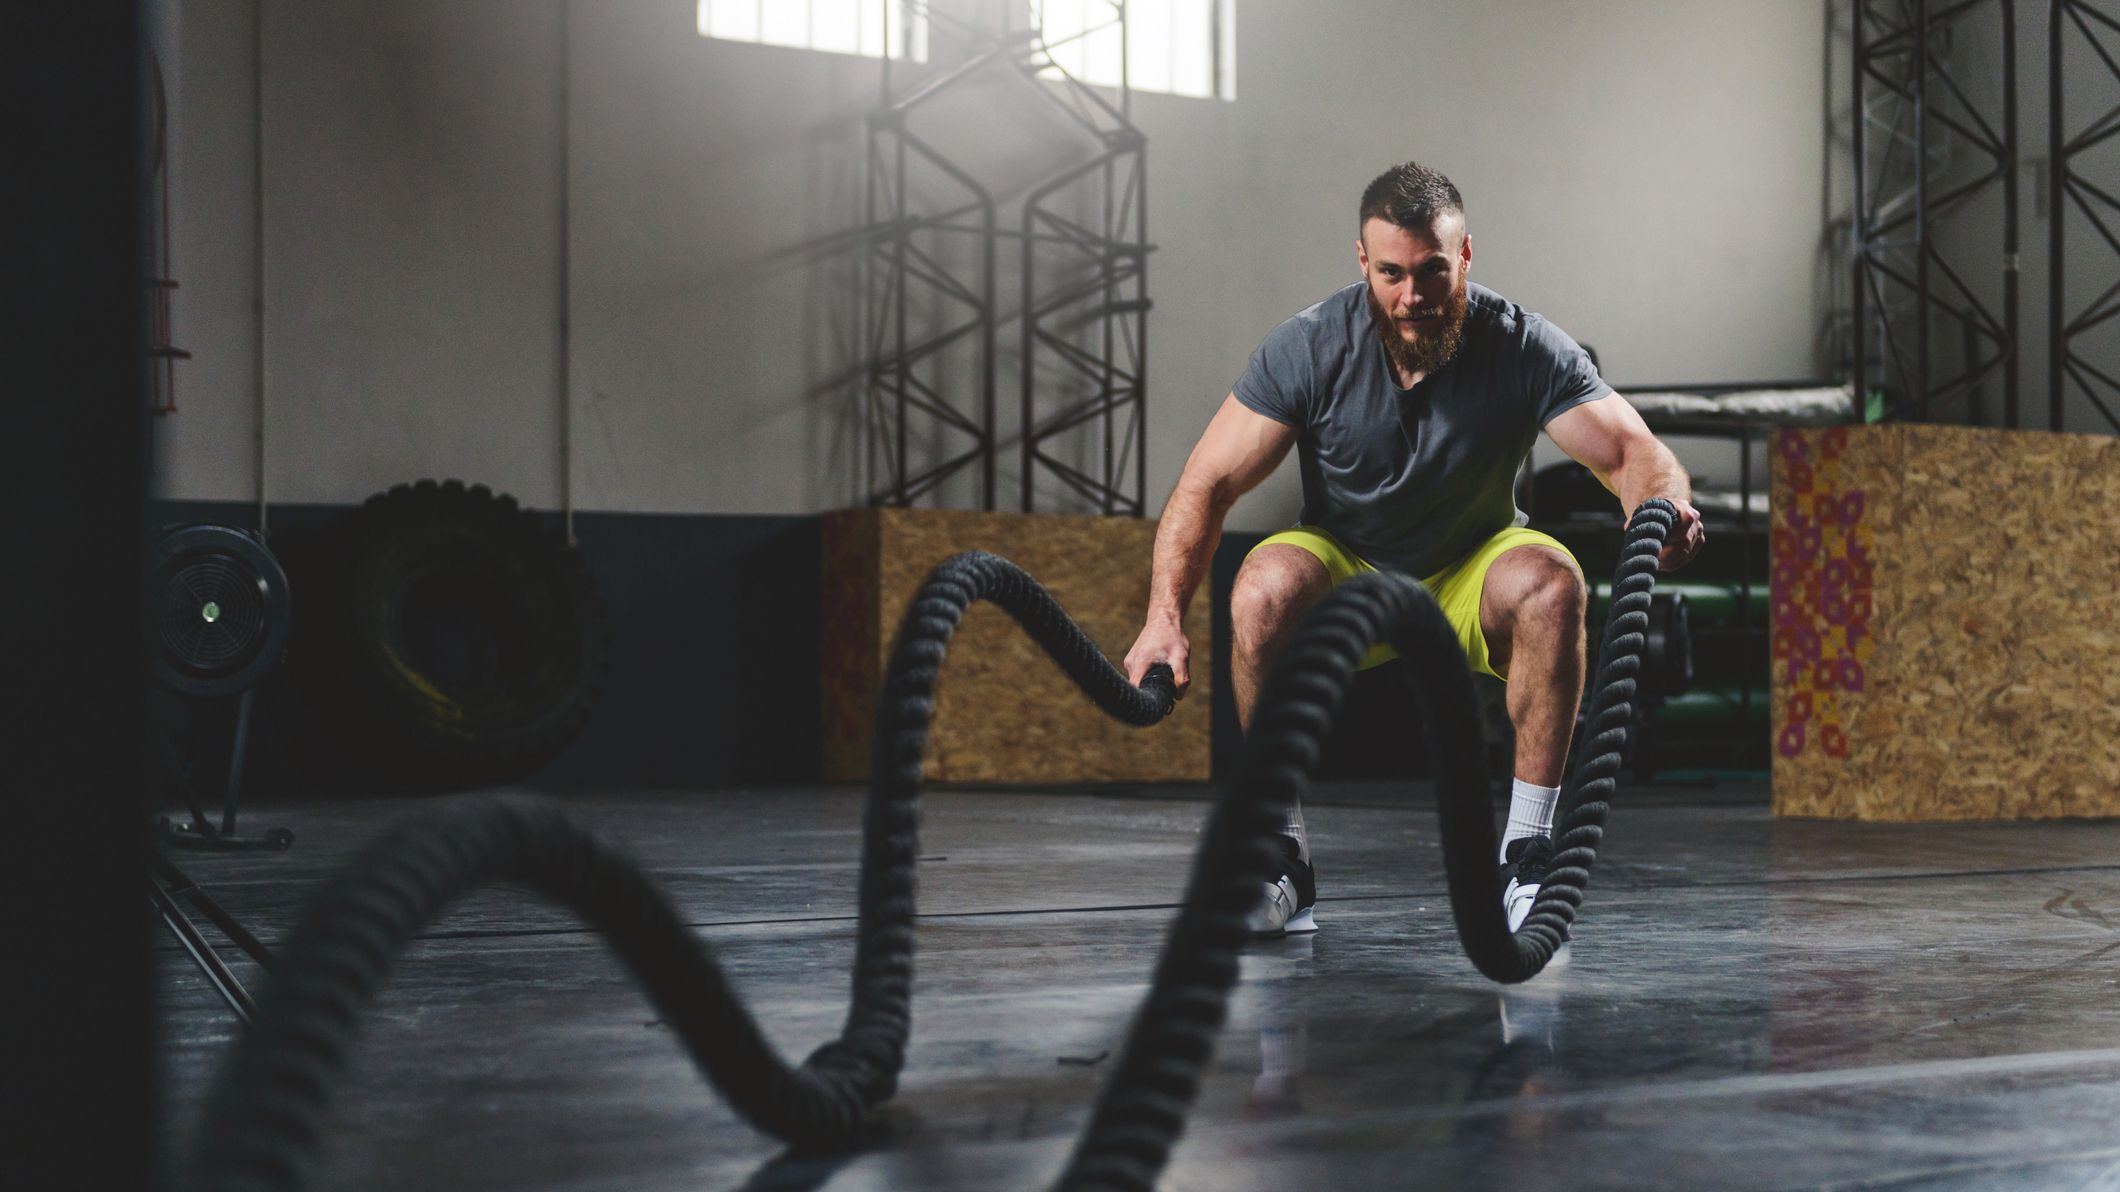 The Battle Rope Workout for Muscular Arms - Muscle & Fitness